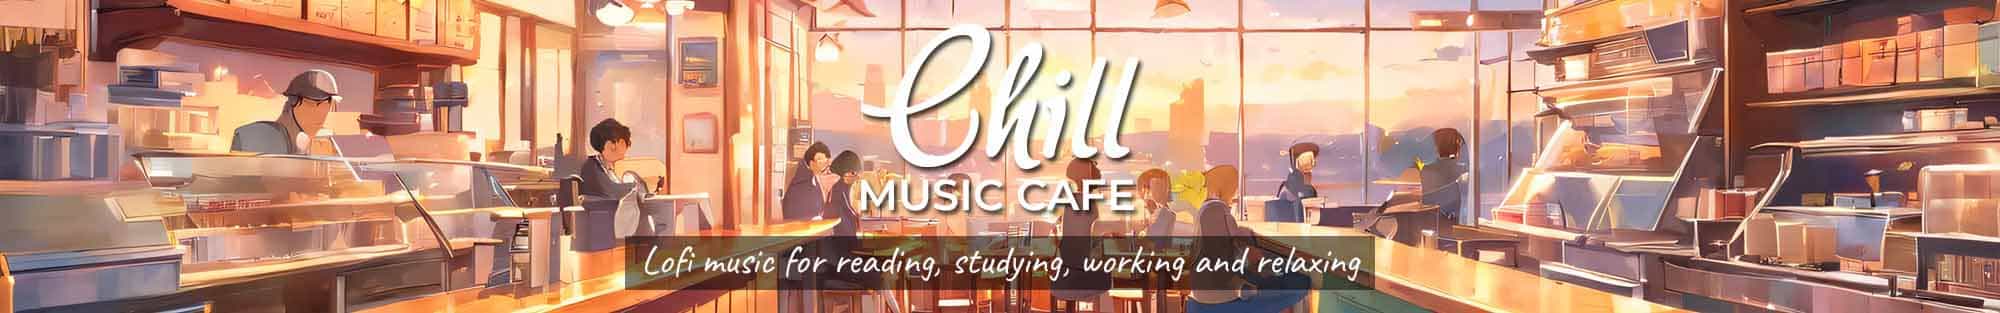 Chill Music Cafe Home Banner